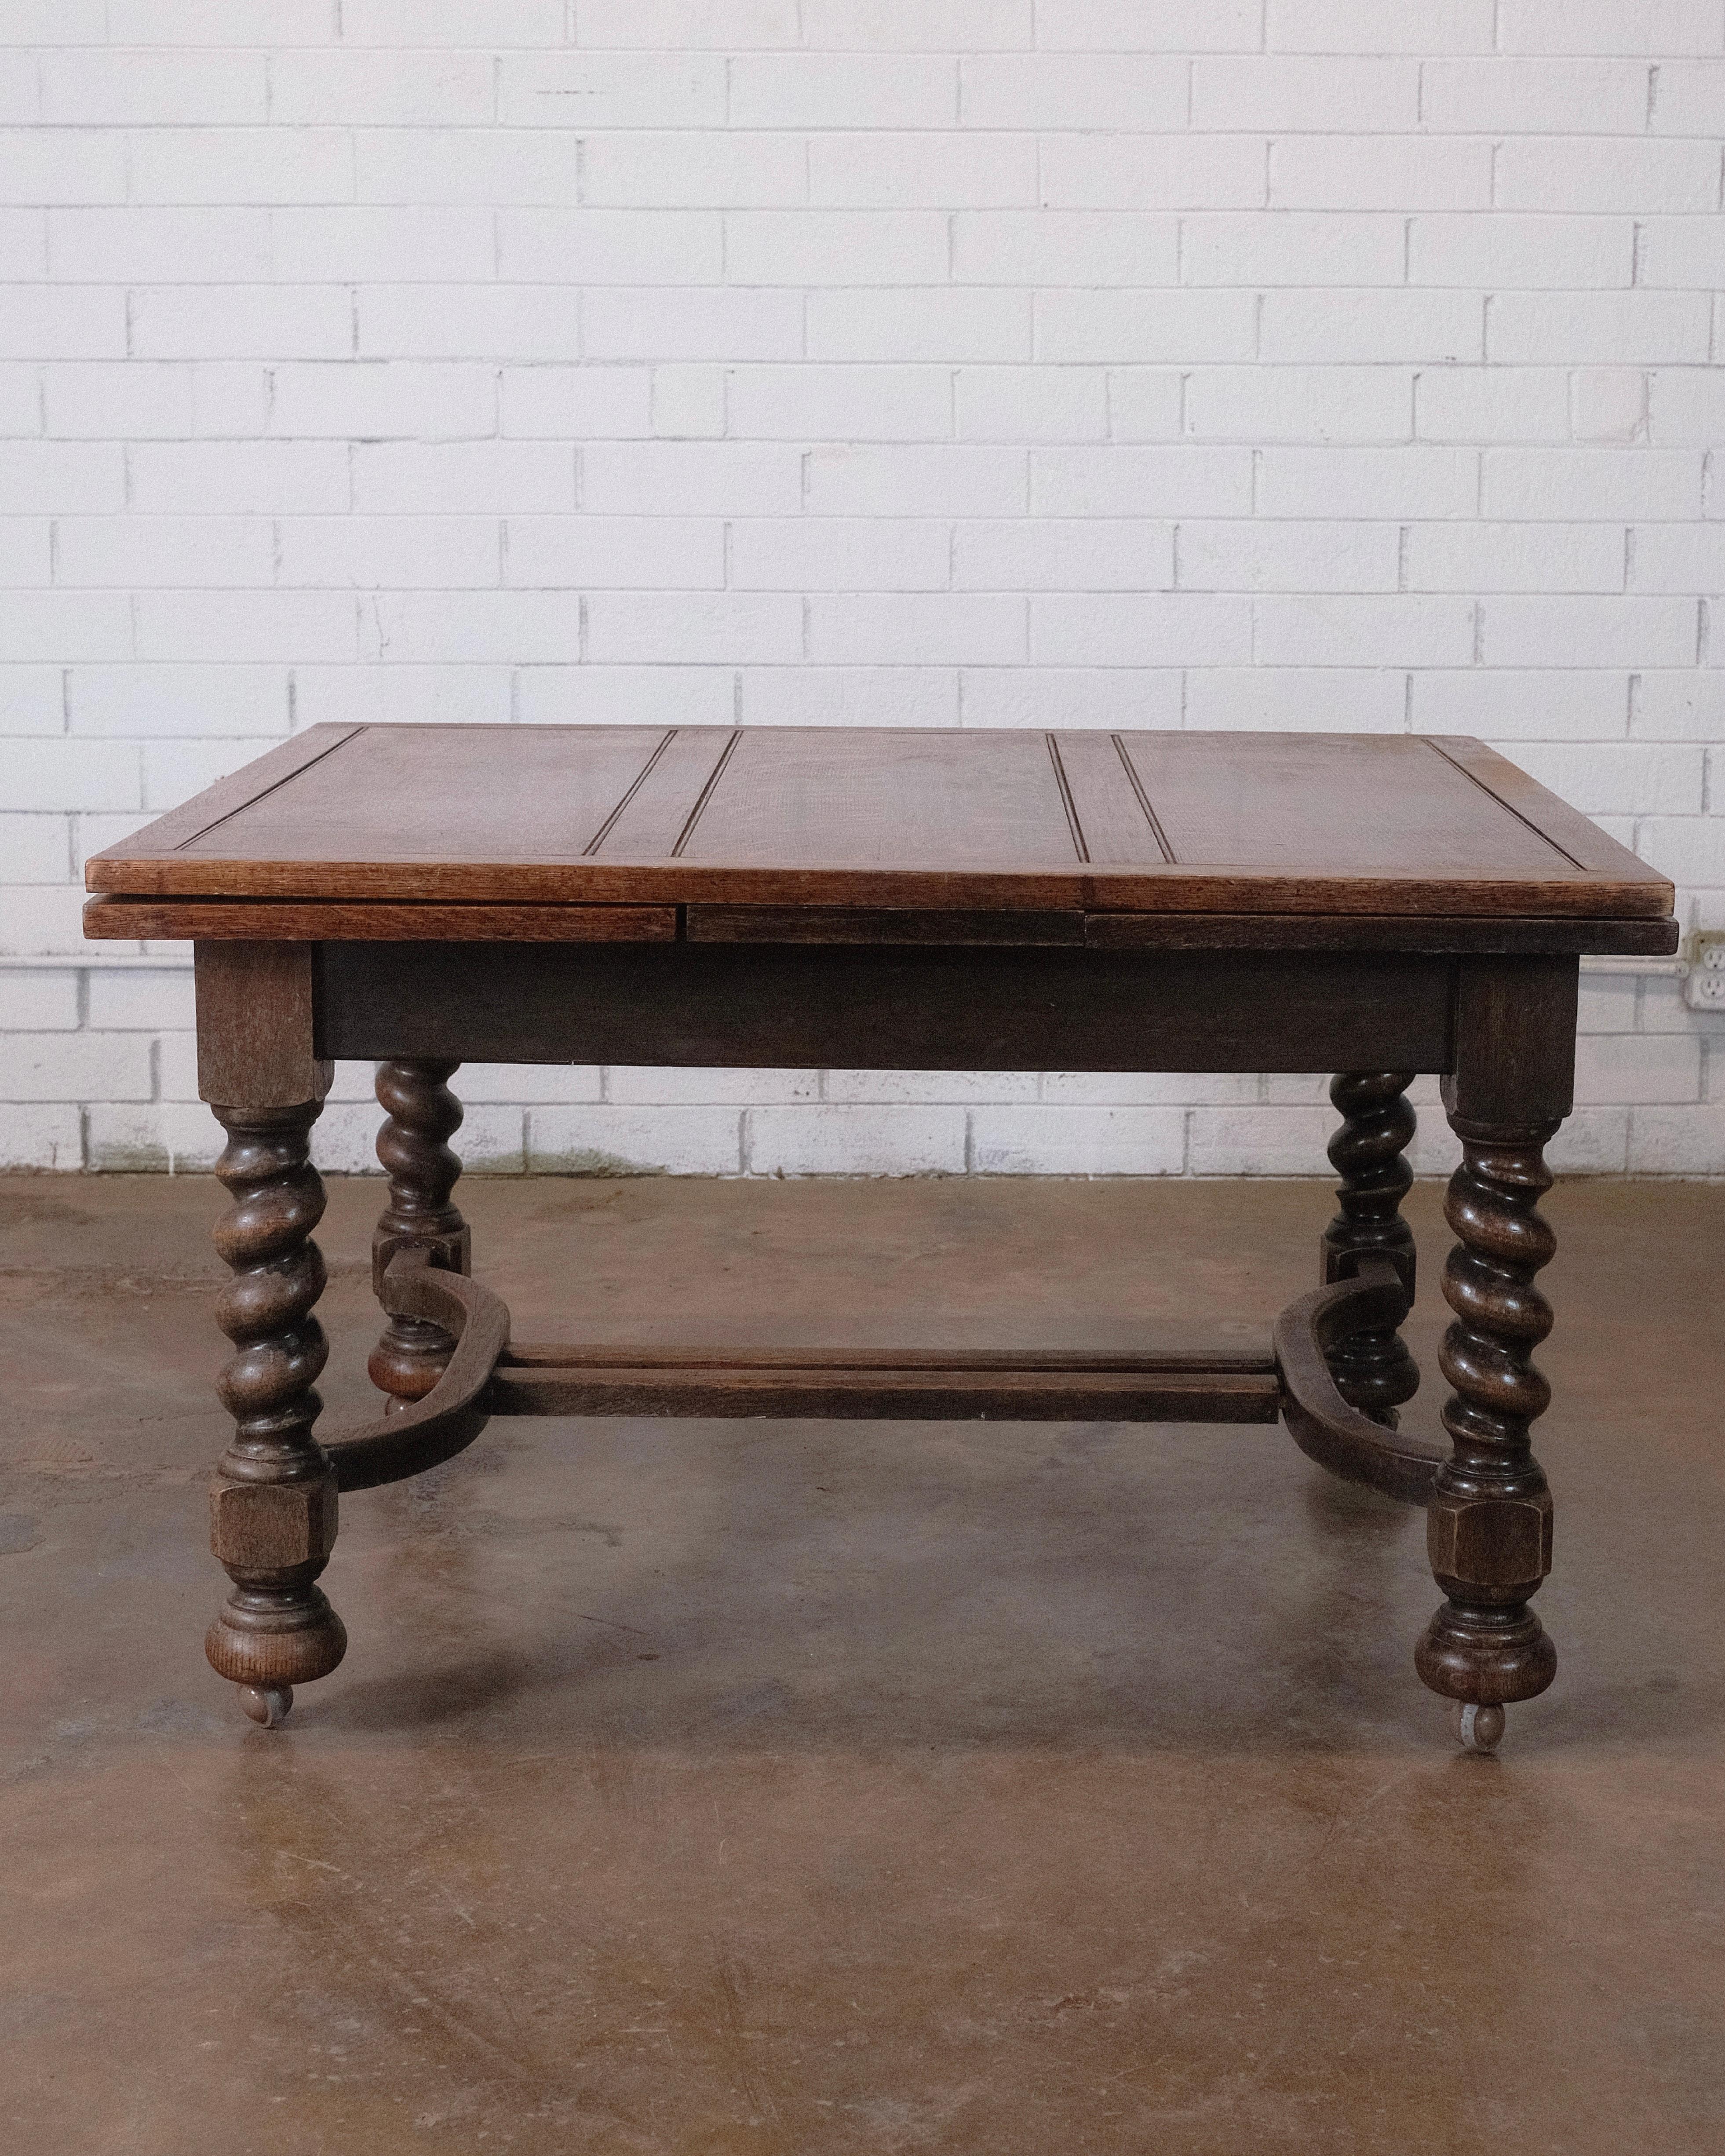 Timeless Antique Oak Draw Leaf Dining Table: Expandable design, rich patina, and enduring oak craftsmanship. The draw leaf mechanism allows for expansion, accommodating both intimate gatherings and larger occasions. Versatile and elegant for any